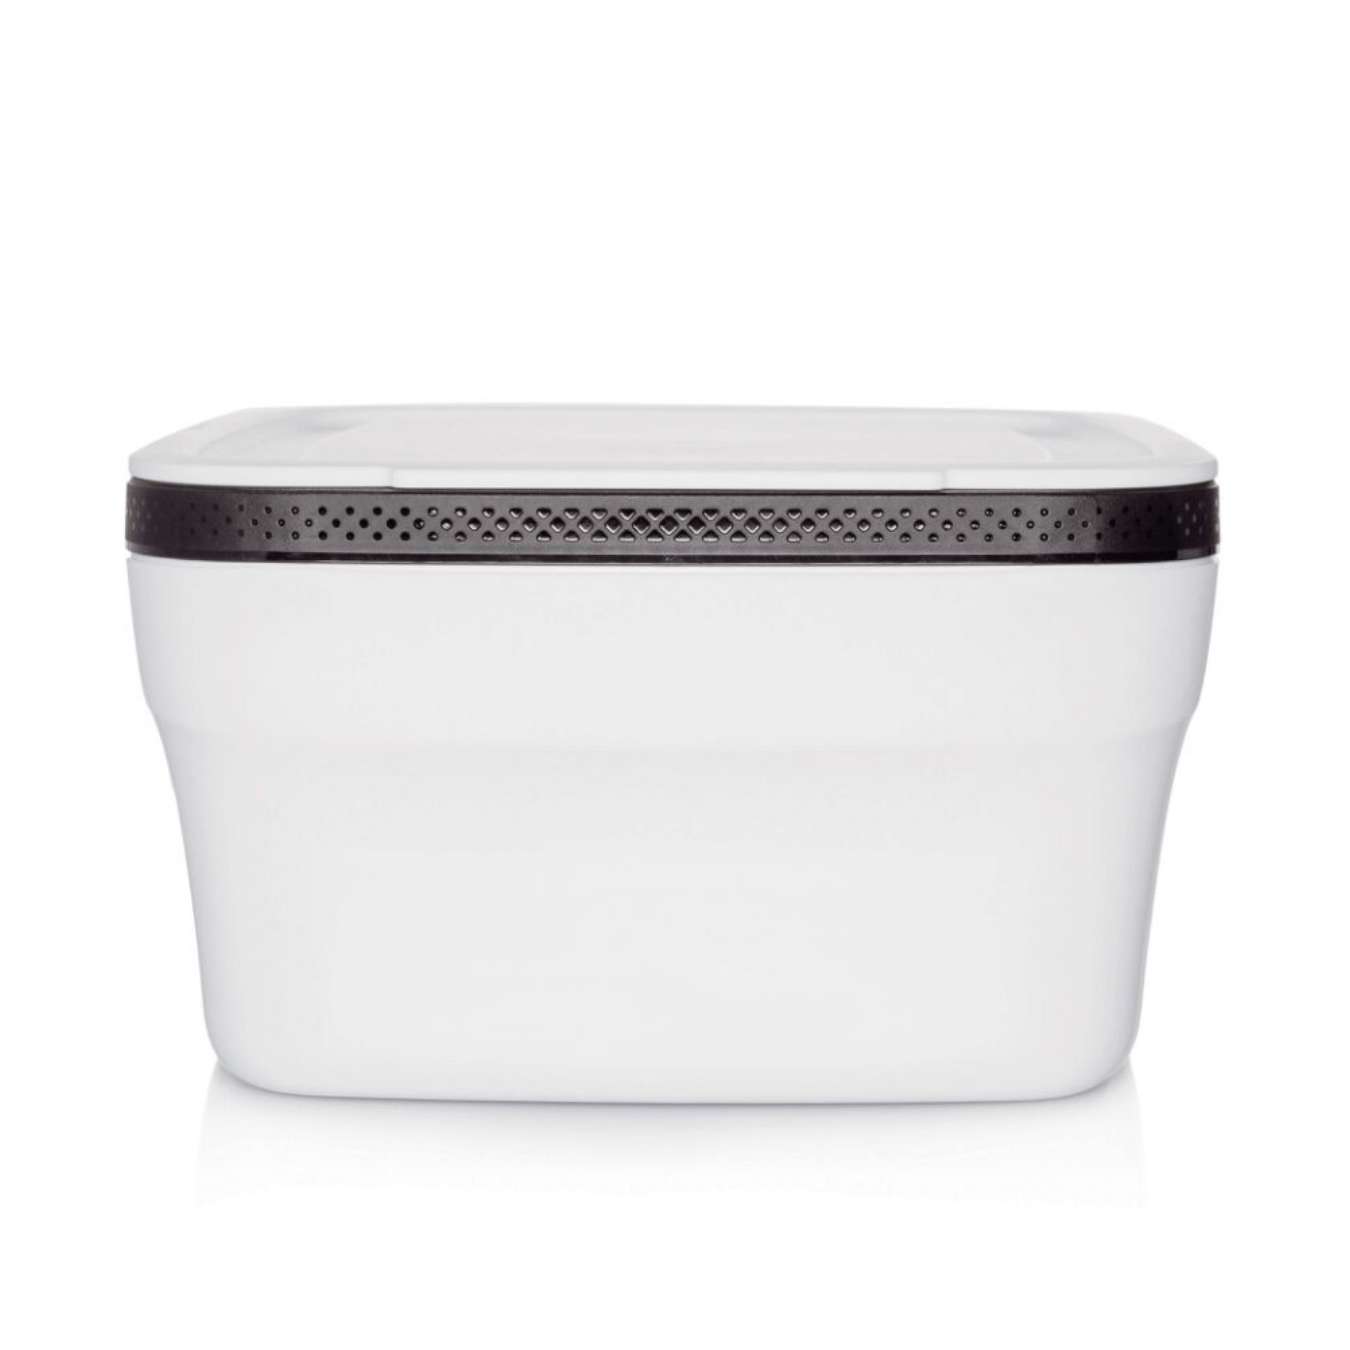 An image of Tupperware® BreadSmart Large